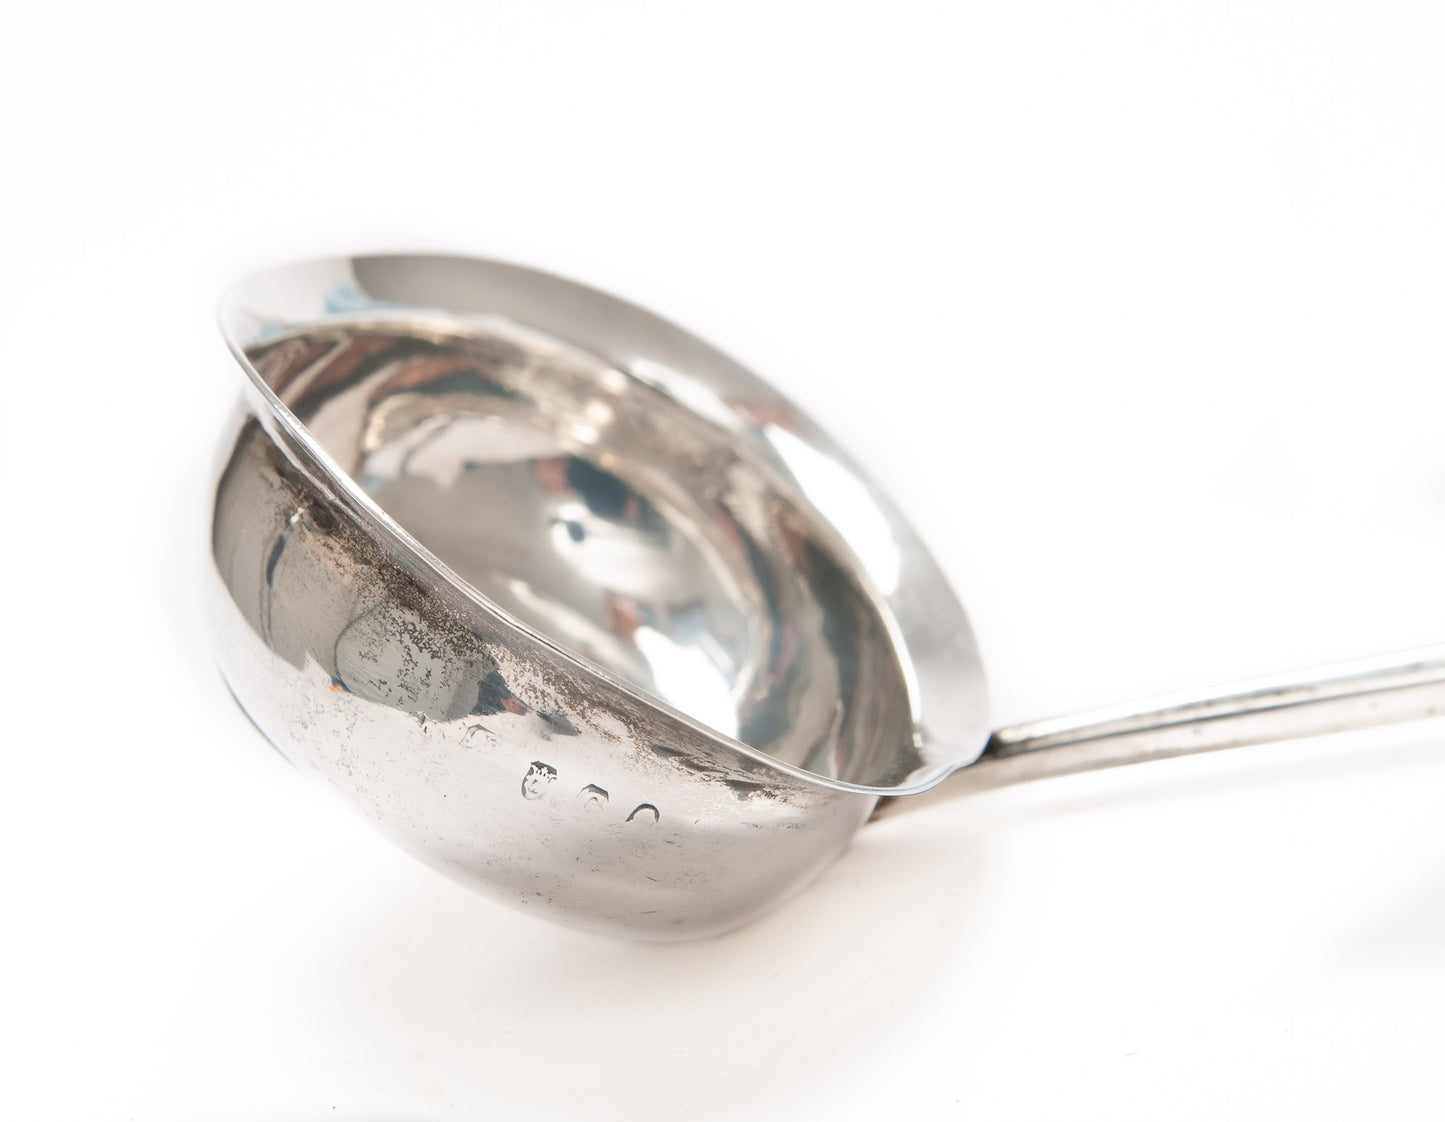 Antique Georgian Silver Toddy Ladle with Rare Venetian Doge Ducato Coin Inset (Code 2085)